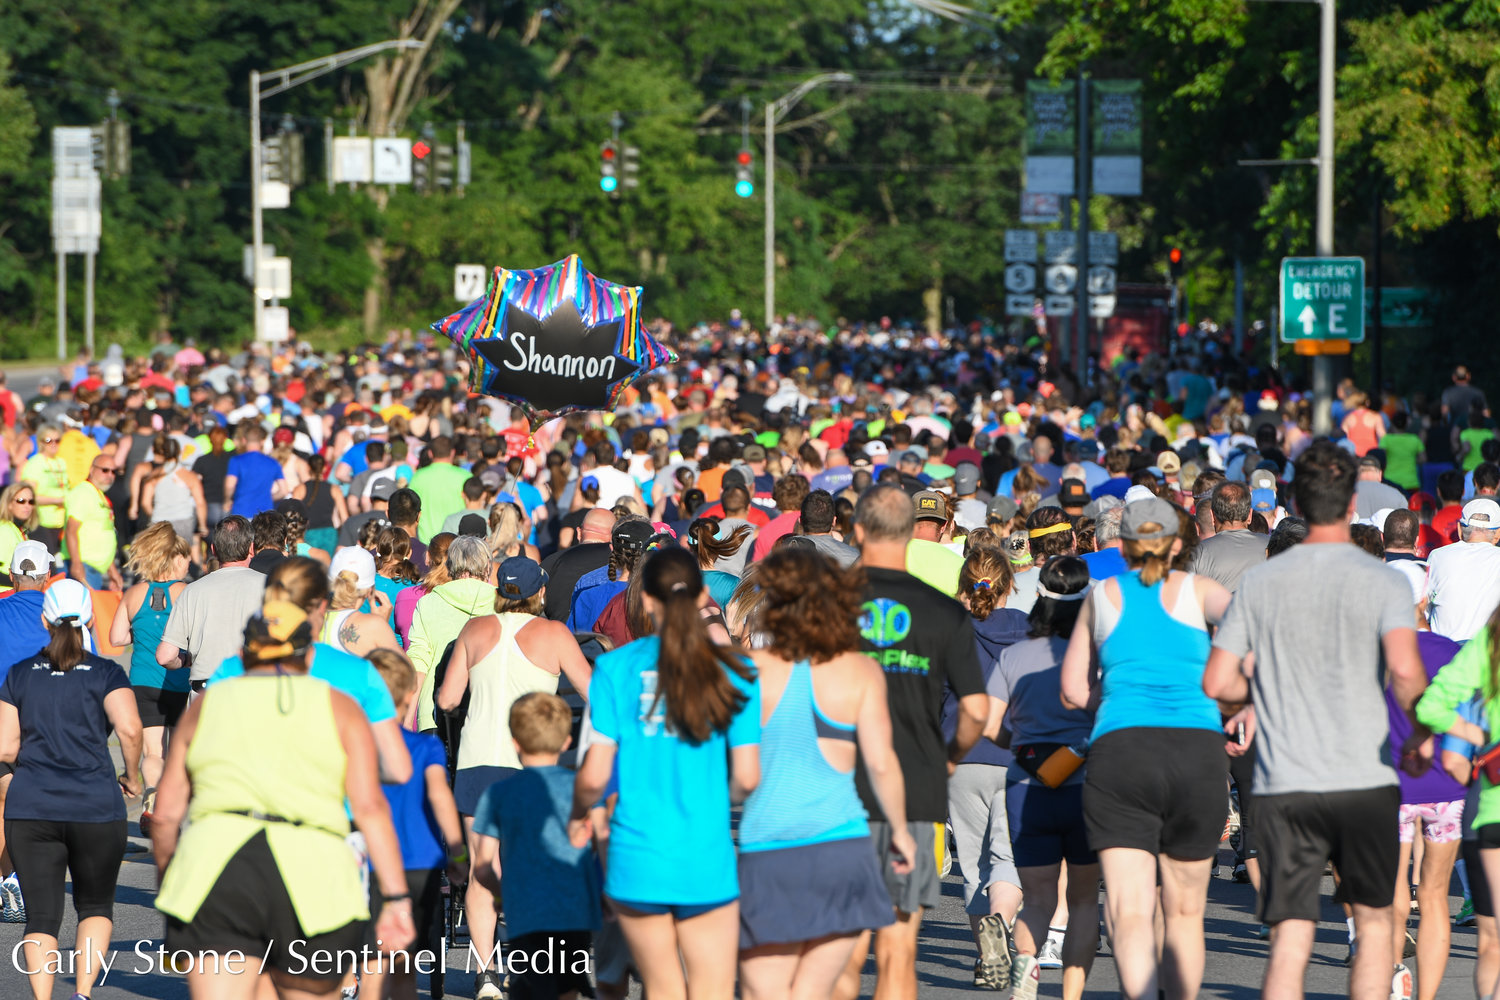 Nearly 2,500 runners participated in the 2022 Boilermaker 5K in Utica on Sunday, July 10.